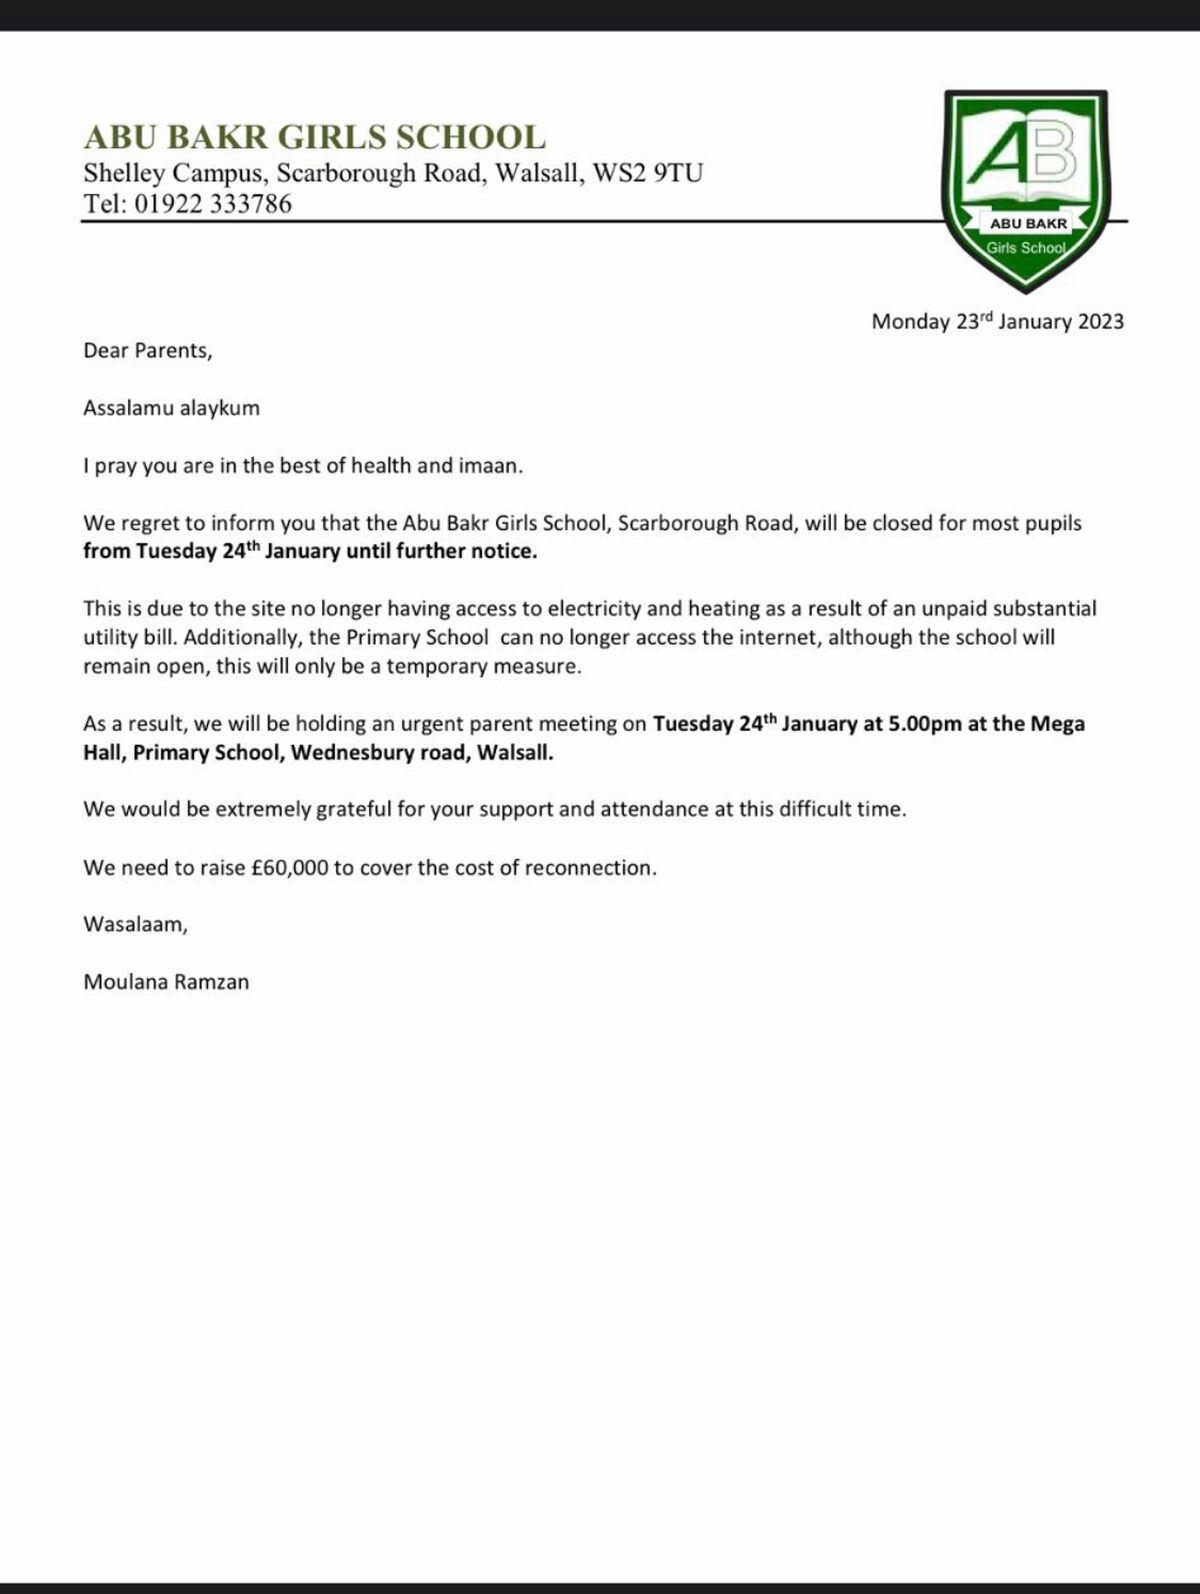 Letter from Abu Bakr School addressed to parents 